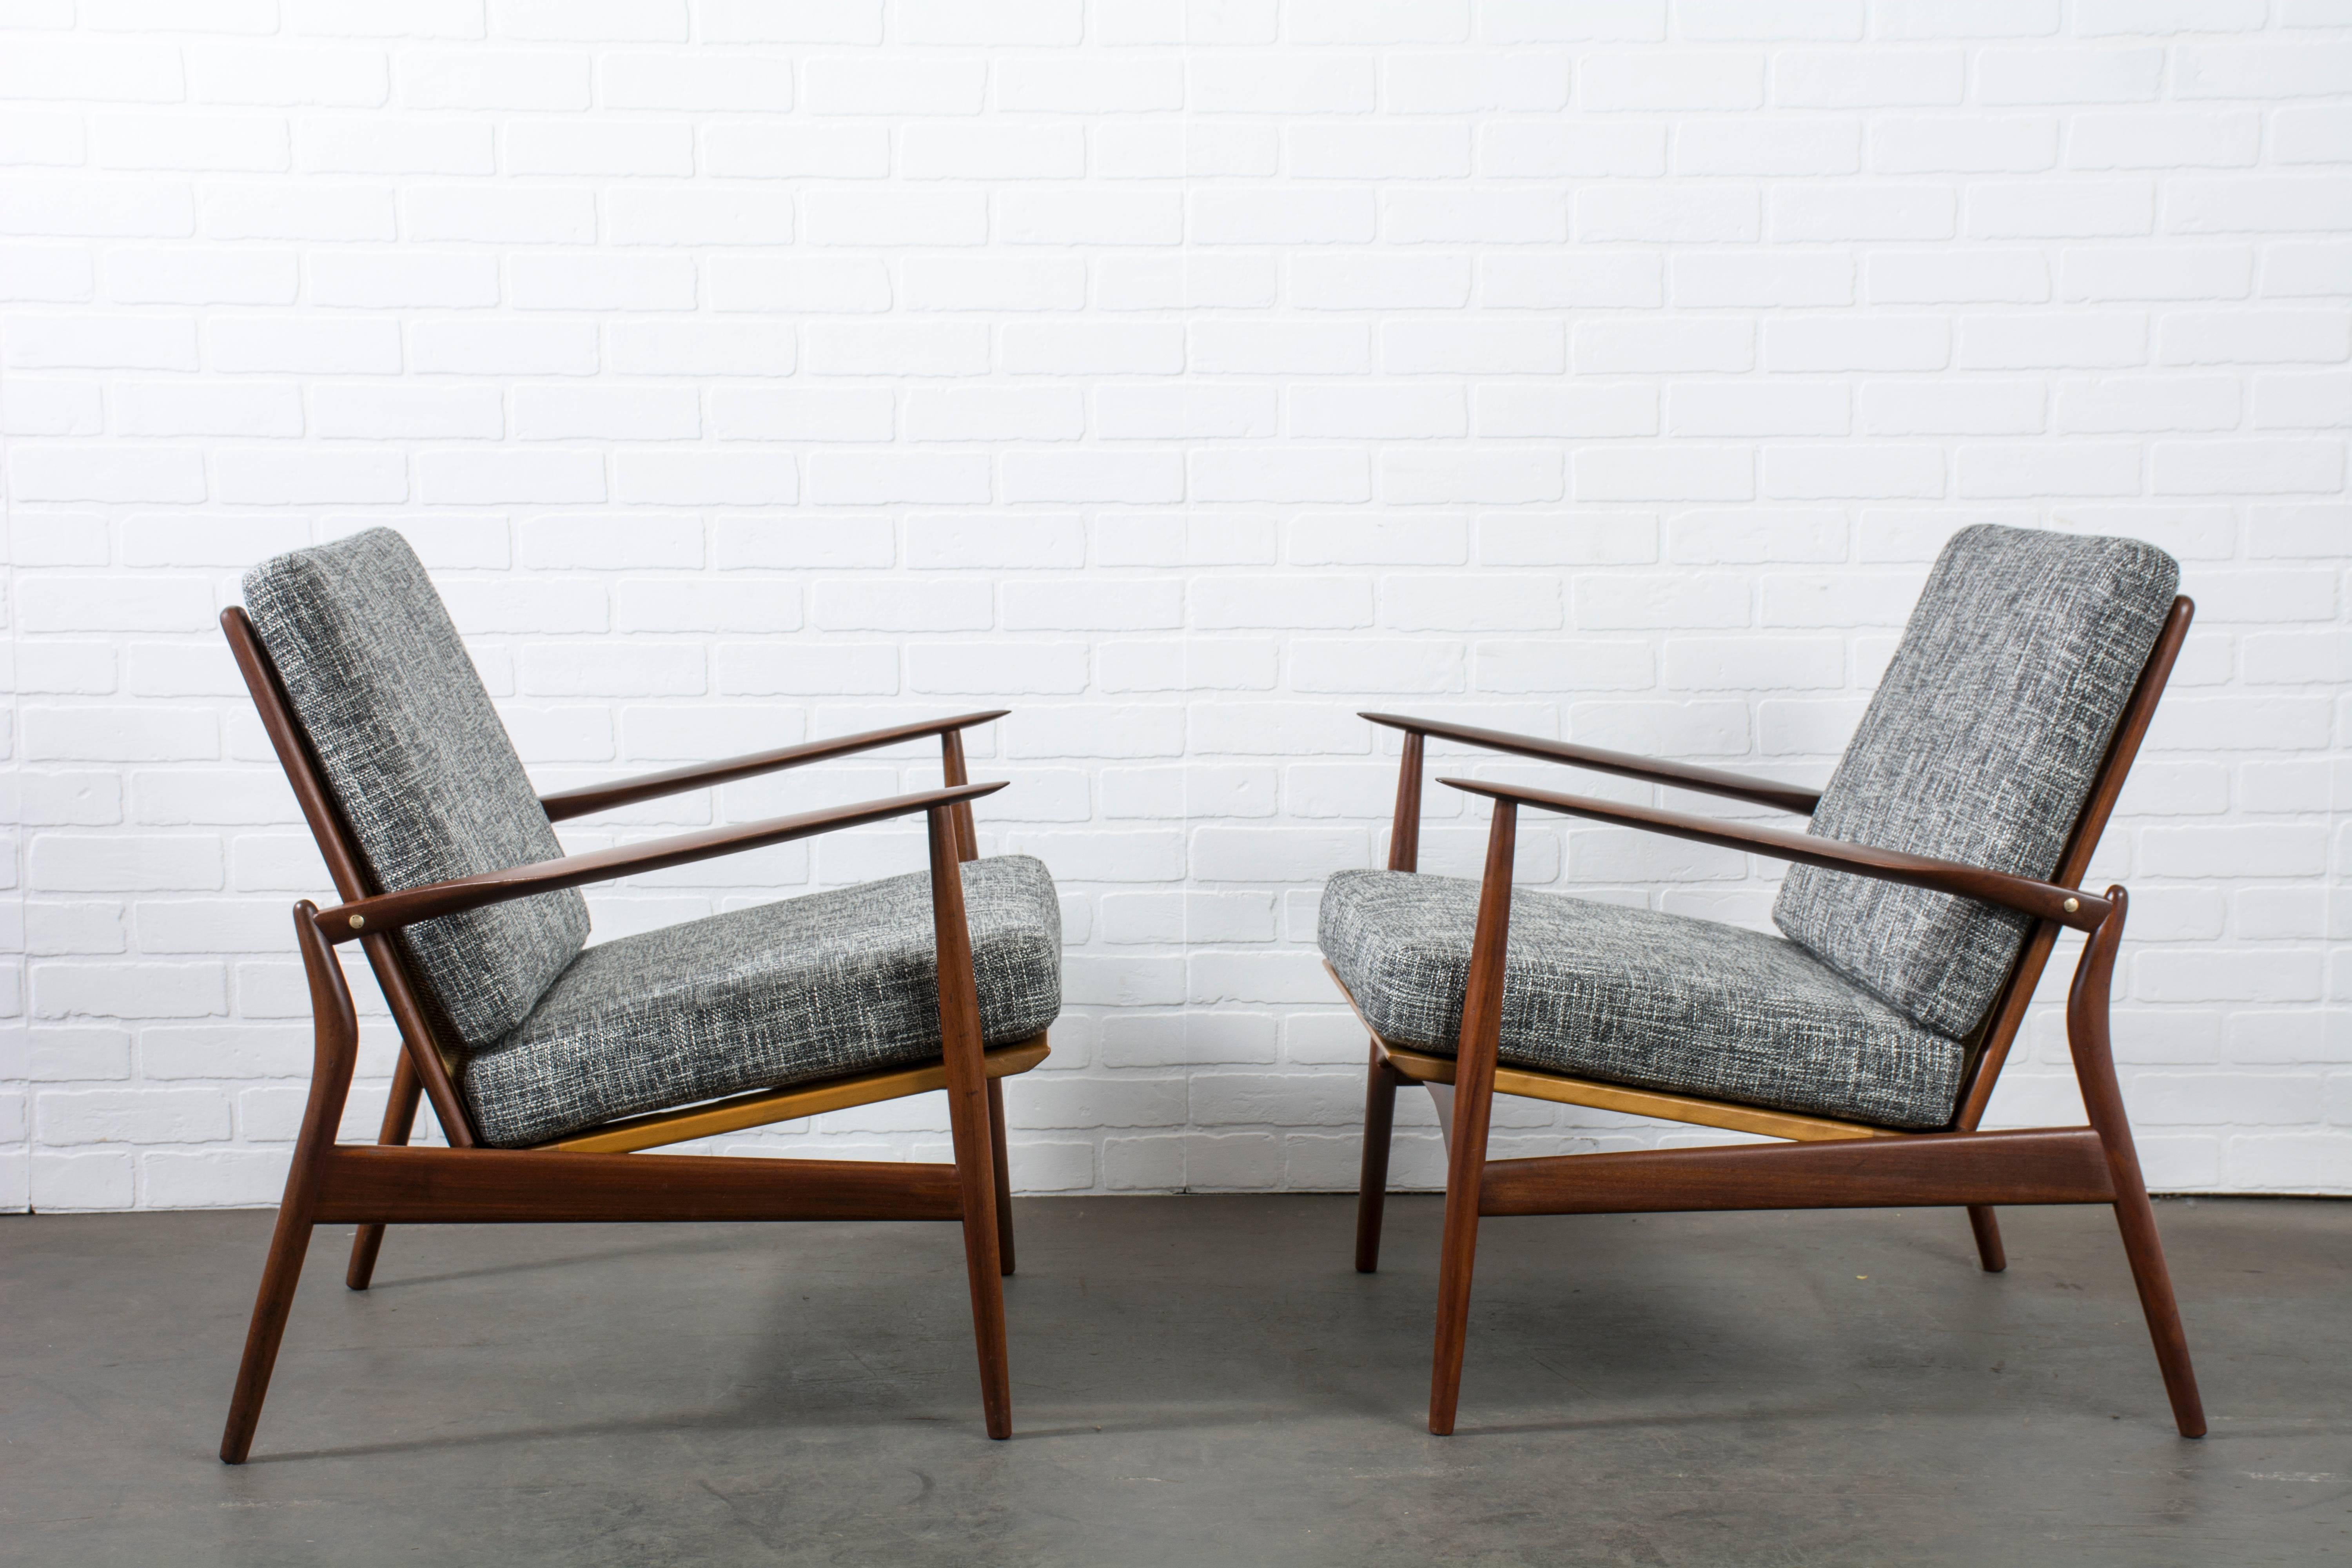 This is a pair of vintage Mid-Century 'spear' lounge chairs by Ib Kofod-Larsen for Selig (model #544 - 15), circa 1960's. They have walnut frames, cane backs, new upholstery, and new straps.